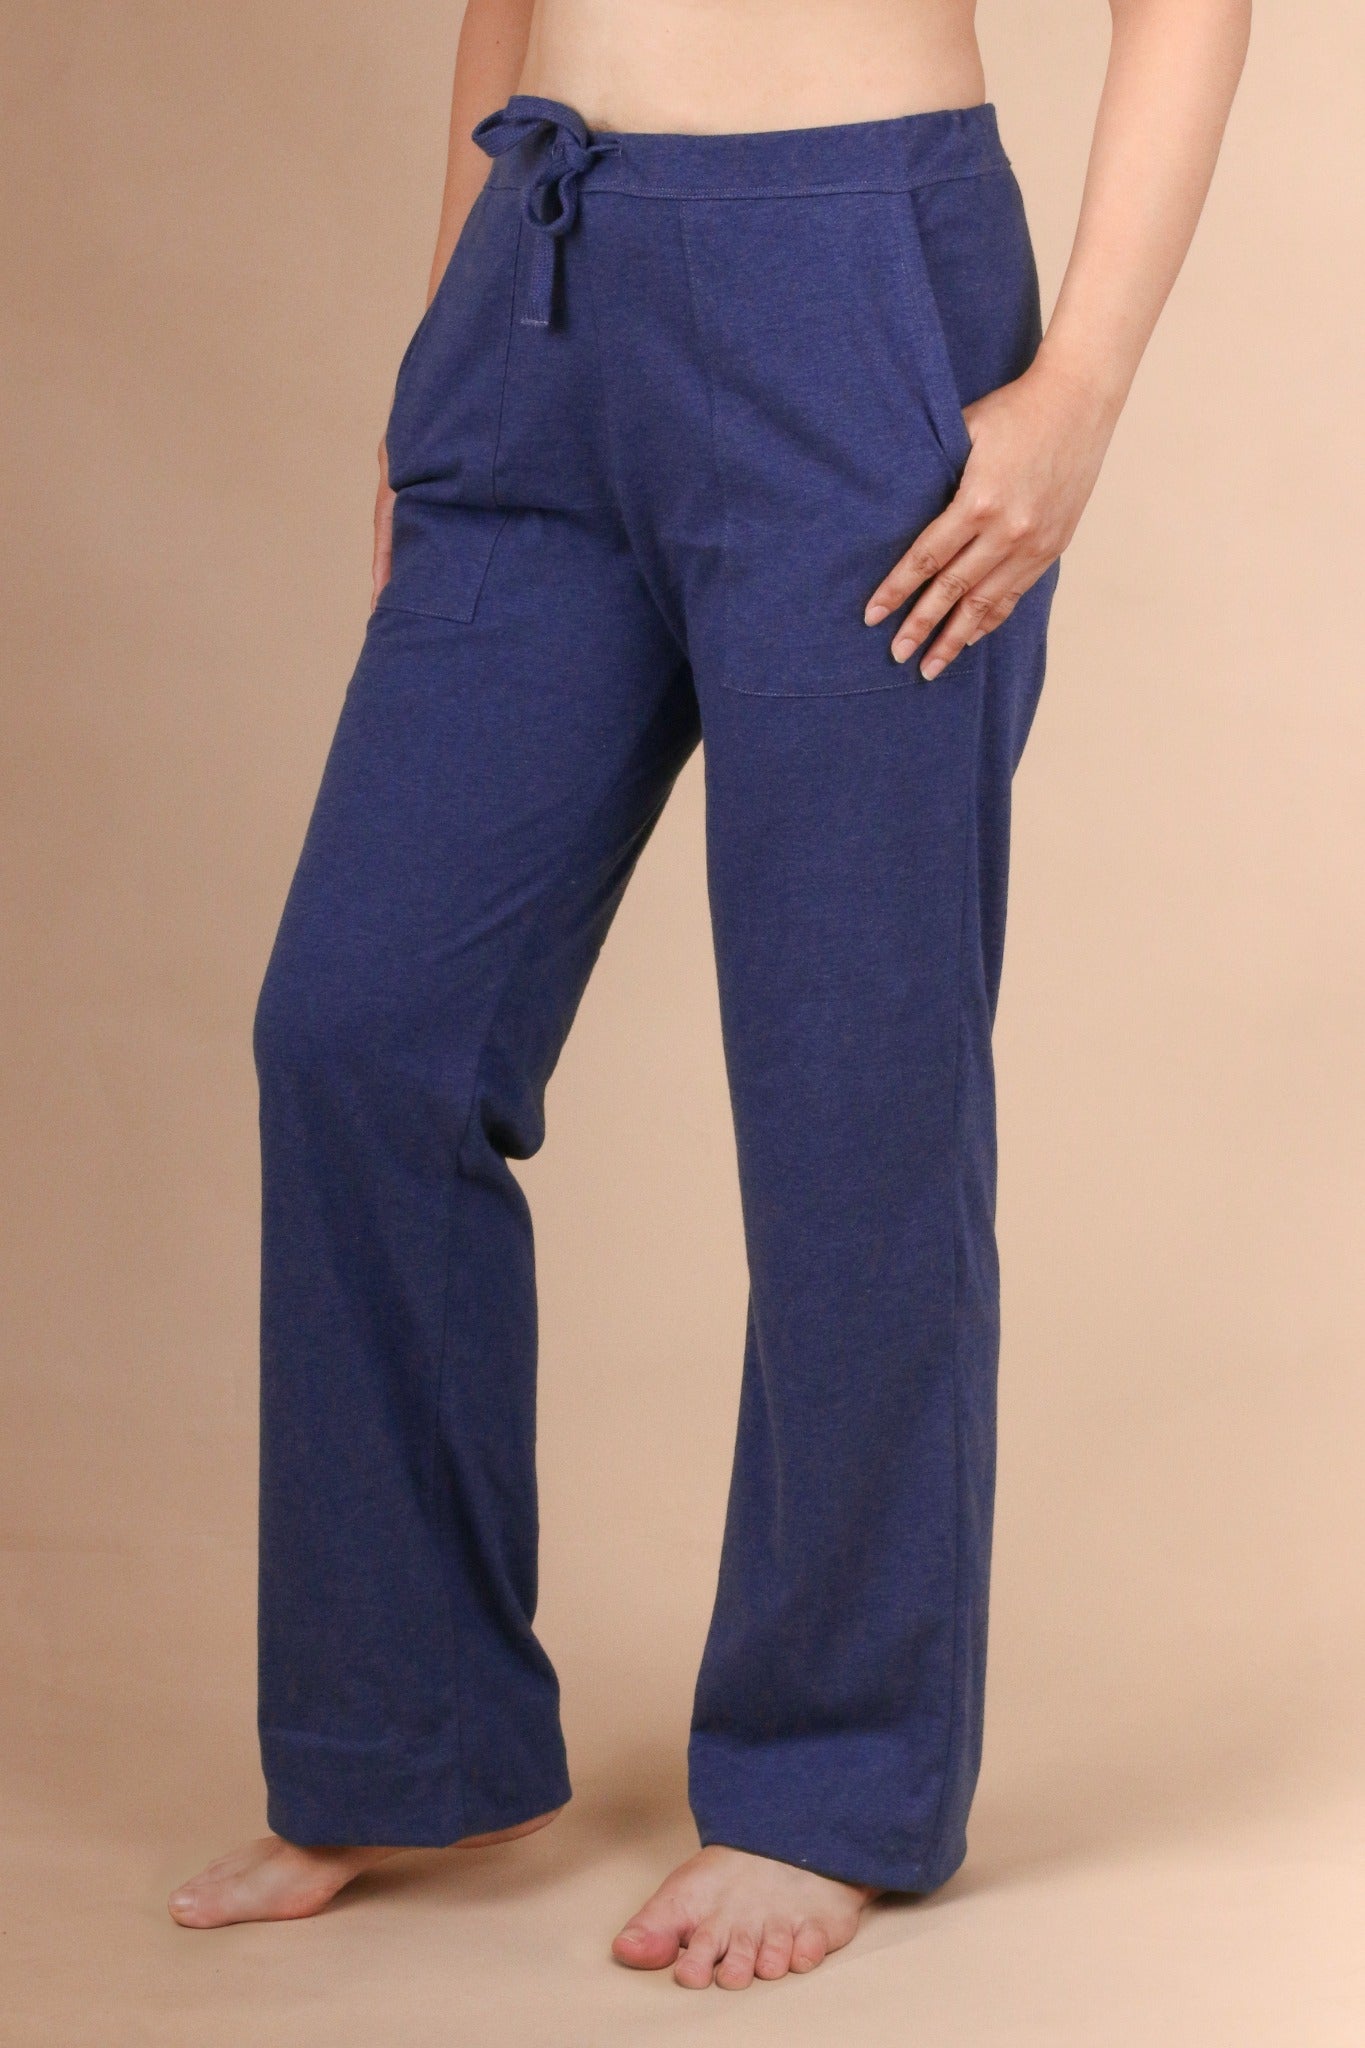 Organic Cotton Women's Drawstring Pants with Patch Pockets